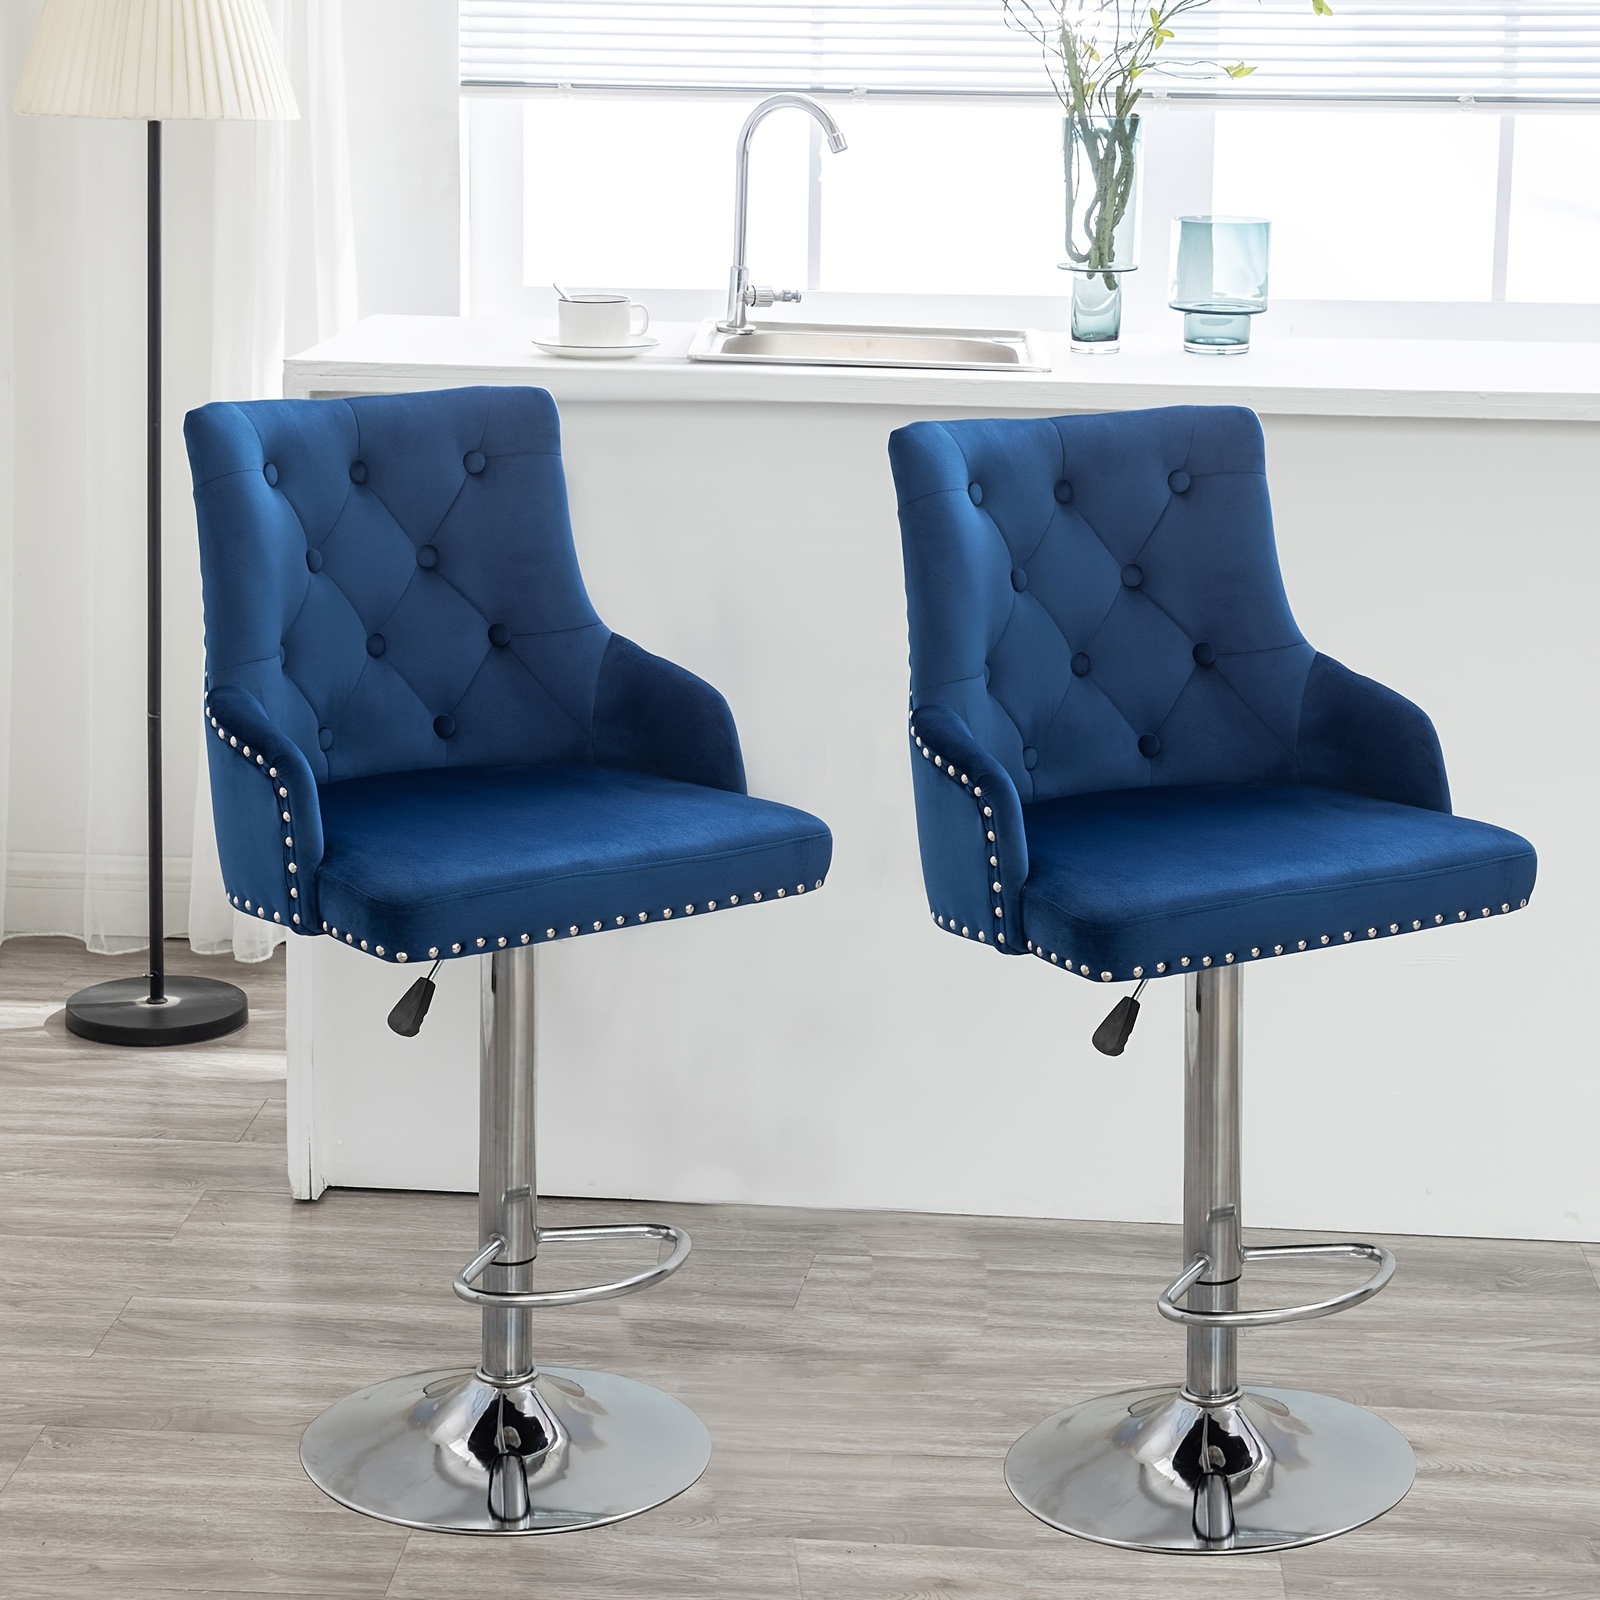 

Bar Stool Blue/ Silver Set Of 2 Adjustable With Backrest, Counter Height Swivel Stool Upholstered Modern Barstool Chair Chrome Base For Kitchen, Home Bar, Dining Room